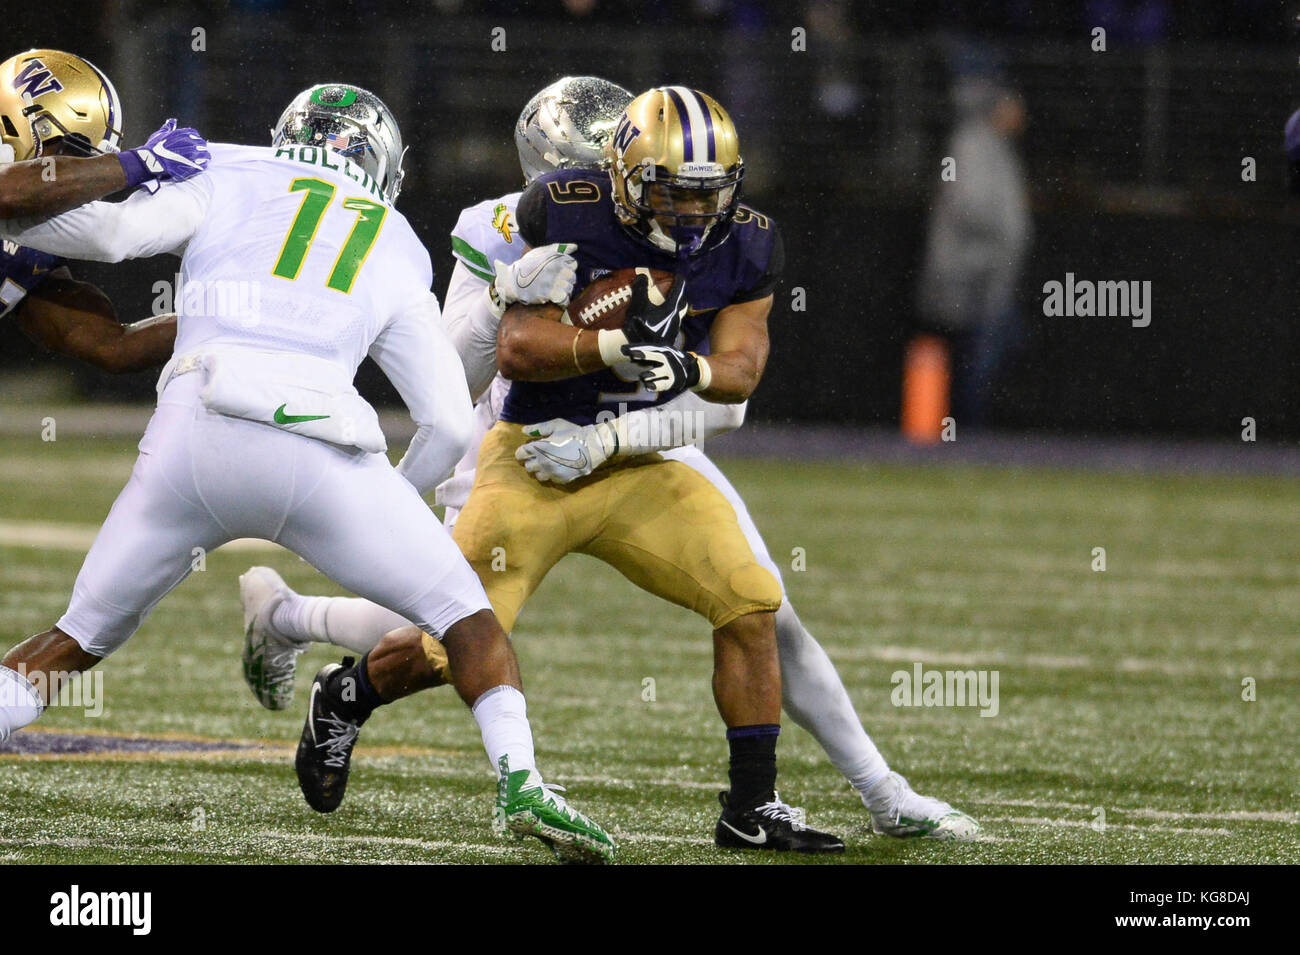 Seattle, WA, USA. 4th Nov, 2017. UW tailback Myles Gaskin (9) picks up yardage against the Oregon defense in a PAC12 football game between the Oregon Ducks and the Washington Huskies. The game was played at Husky Stadium on the University of Washington campus in Seattle, WA. Jeff Halstead/CSM/Alamy Live News Stock Photo